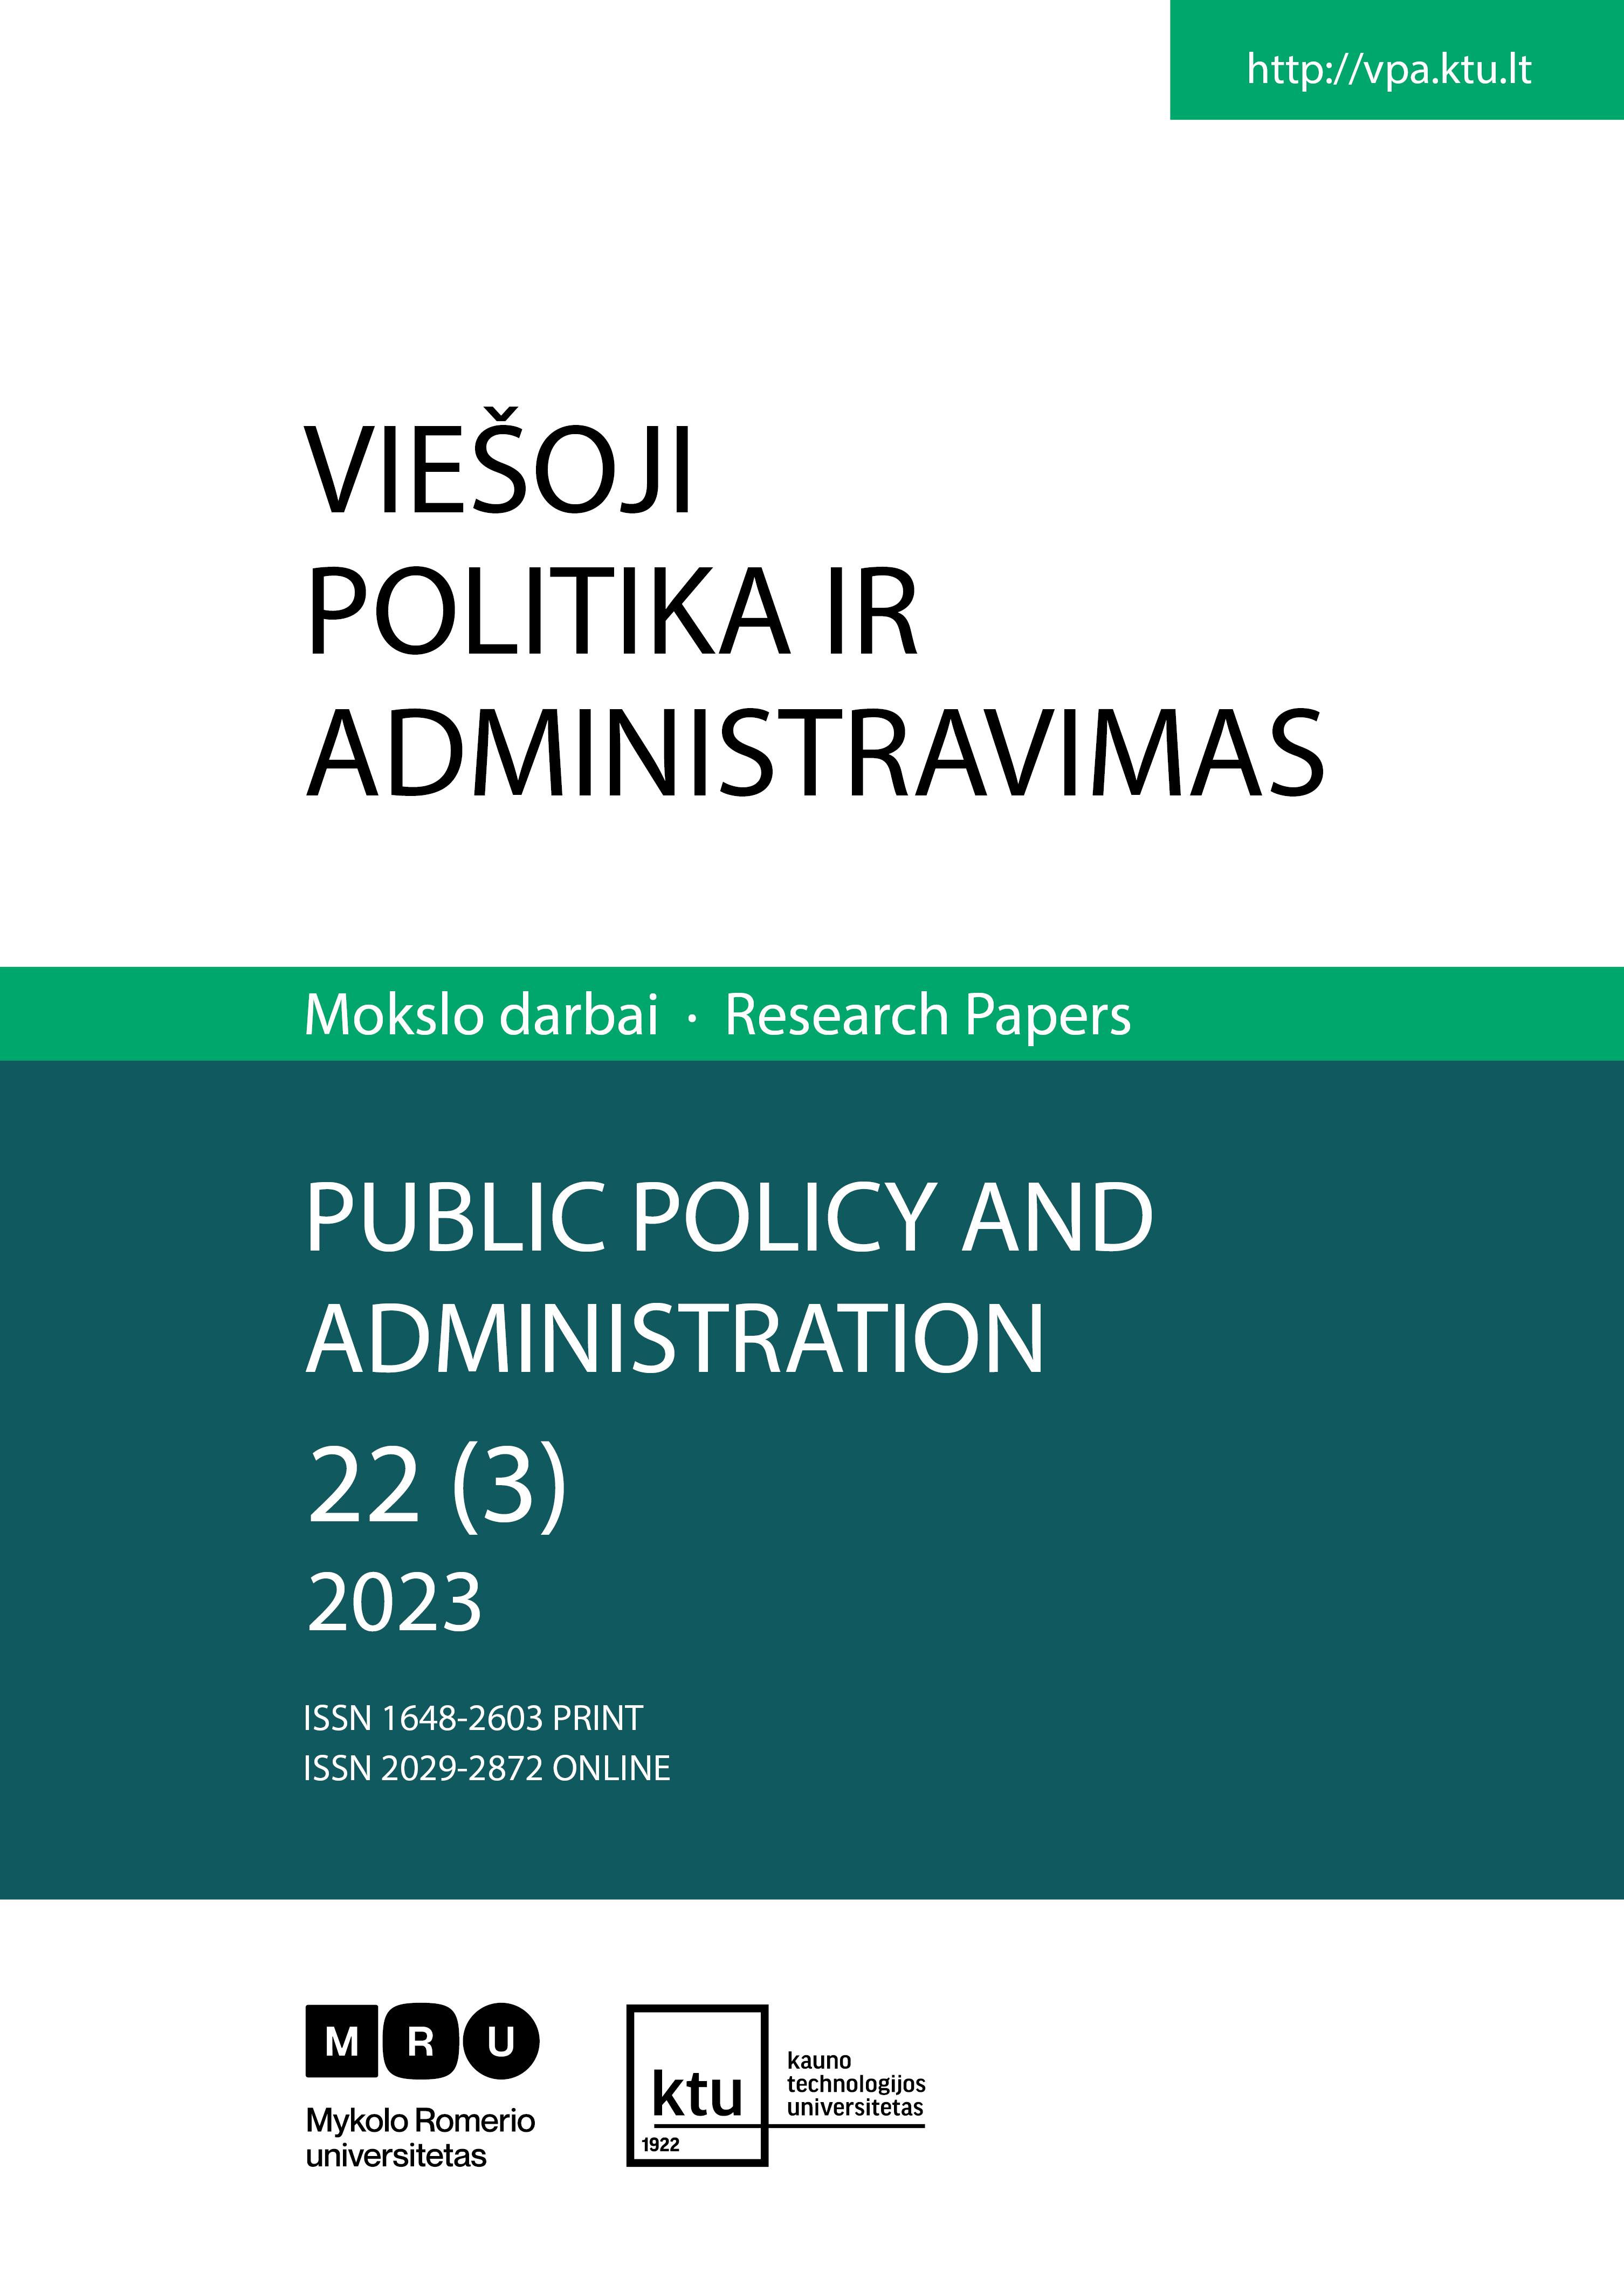 Profiles of Cognitional, Emotional, and Behavioural
Characteristics Influencing Value Systems and Public
Policies Cover Image